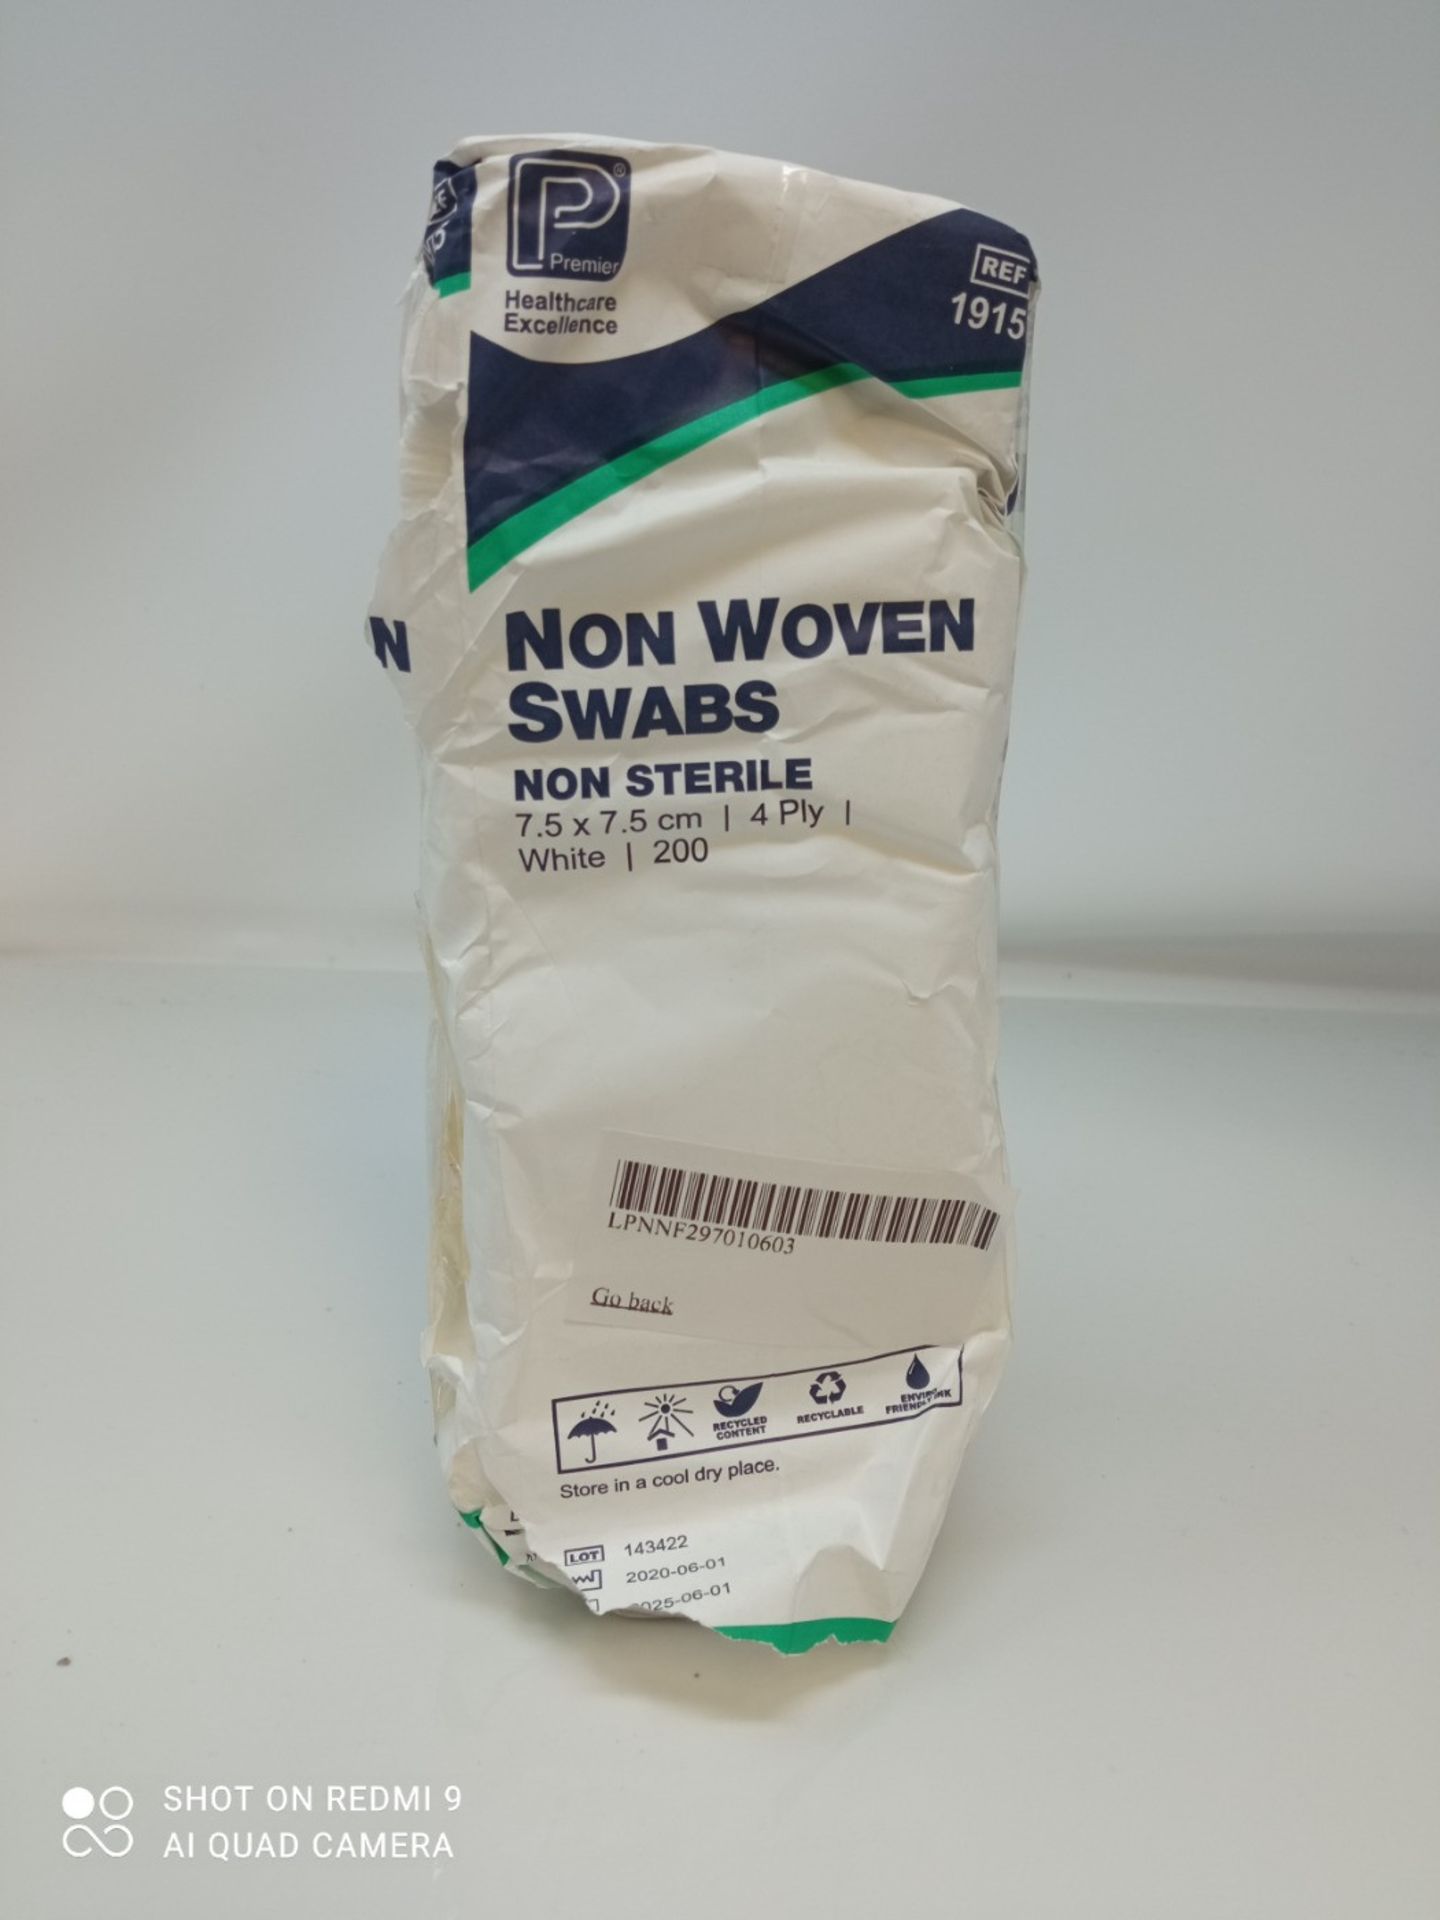 Premier 1915 Non-Sterile Non-Woven Swabs 4 Ply 7.5 cm x 7.5 cm White Paper Packs (Pack - Image 2 of 2